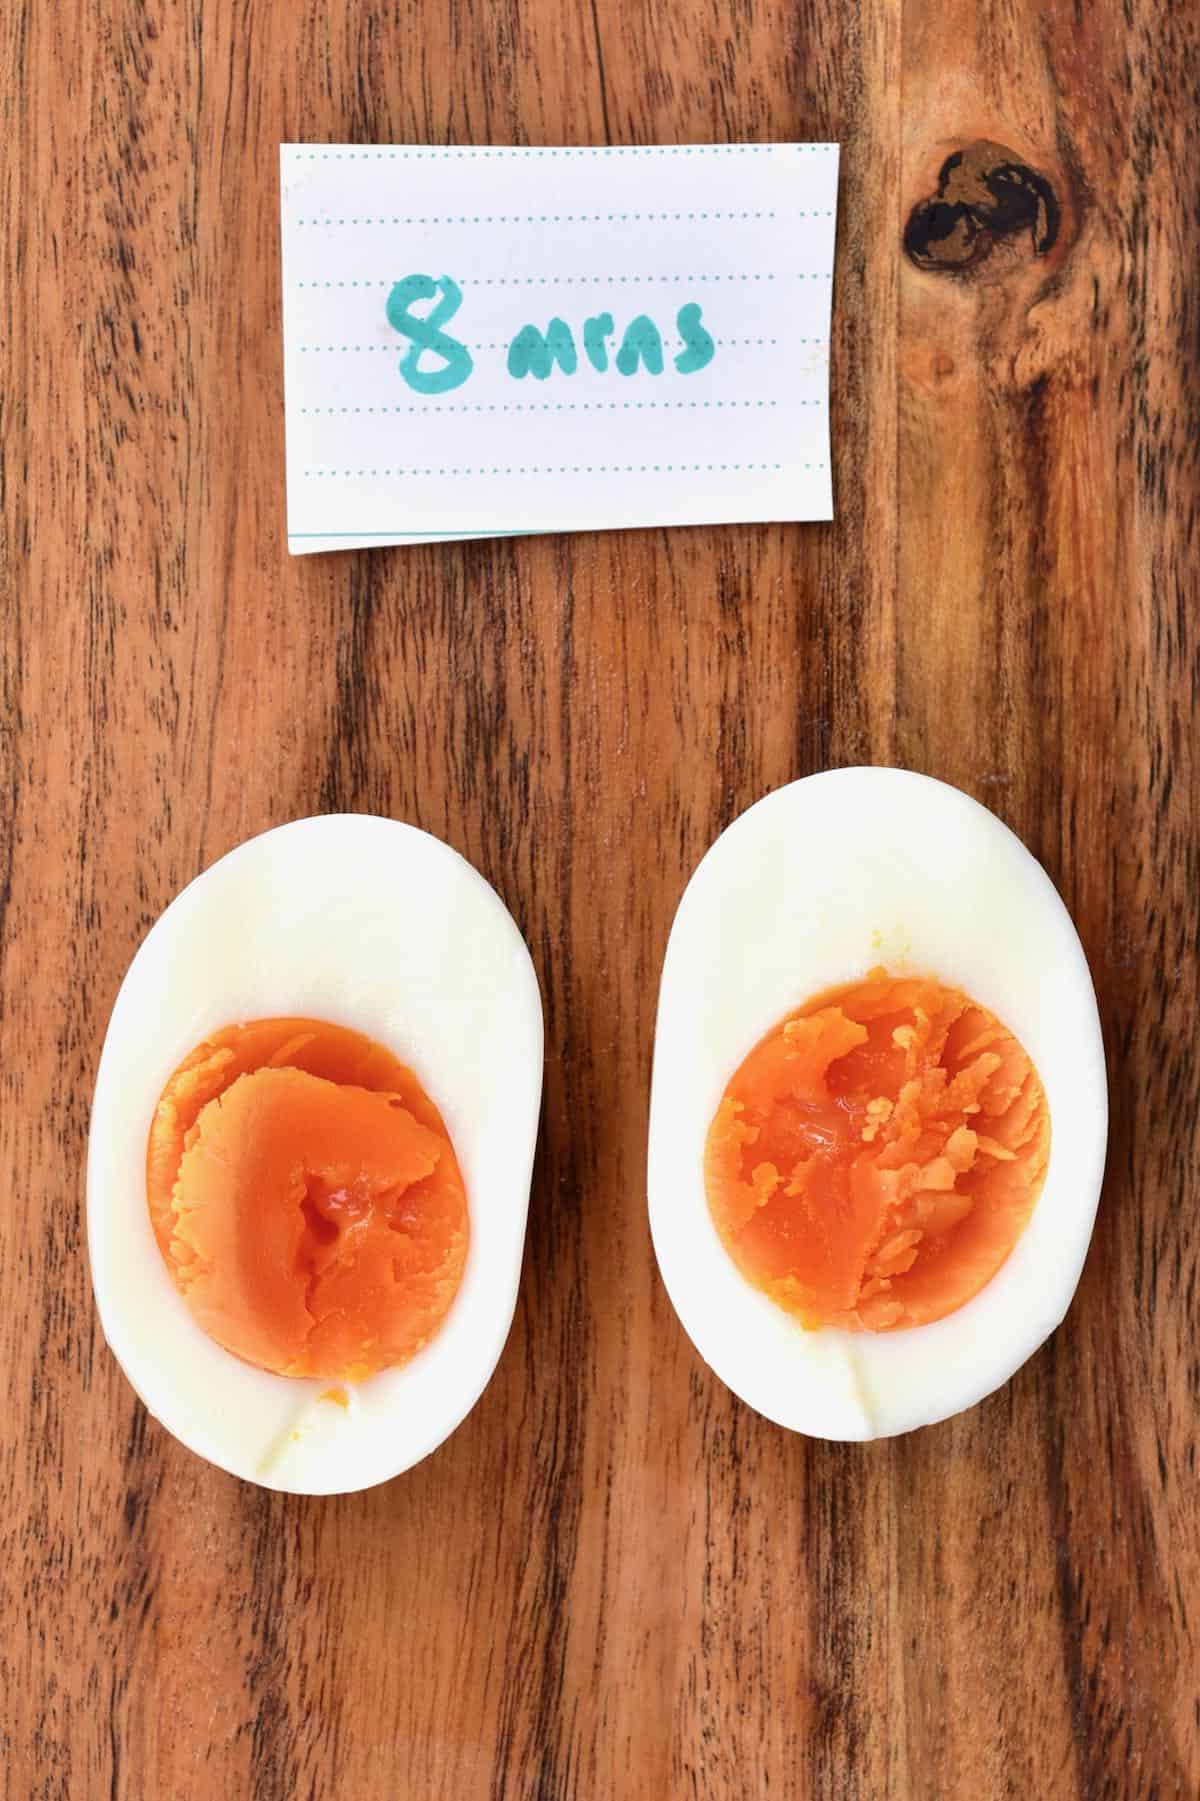 Egg boiled for 8 minutes cut in two